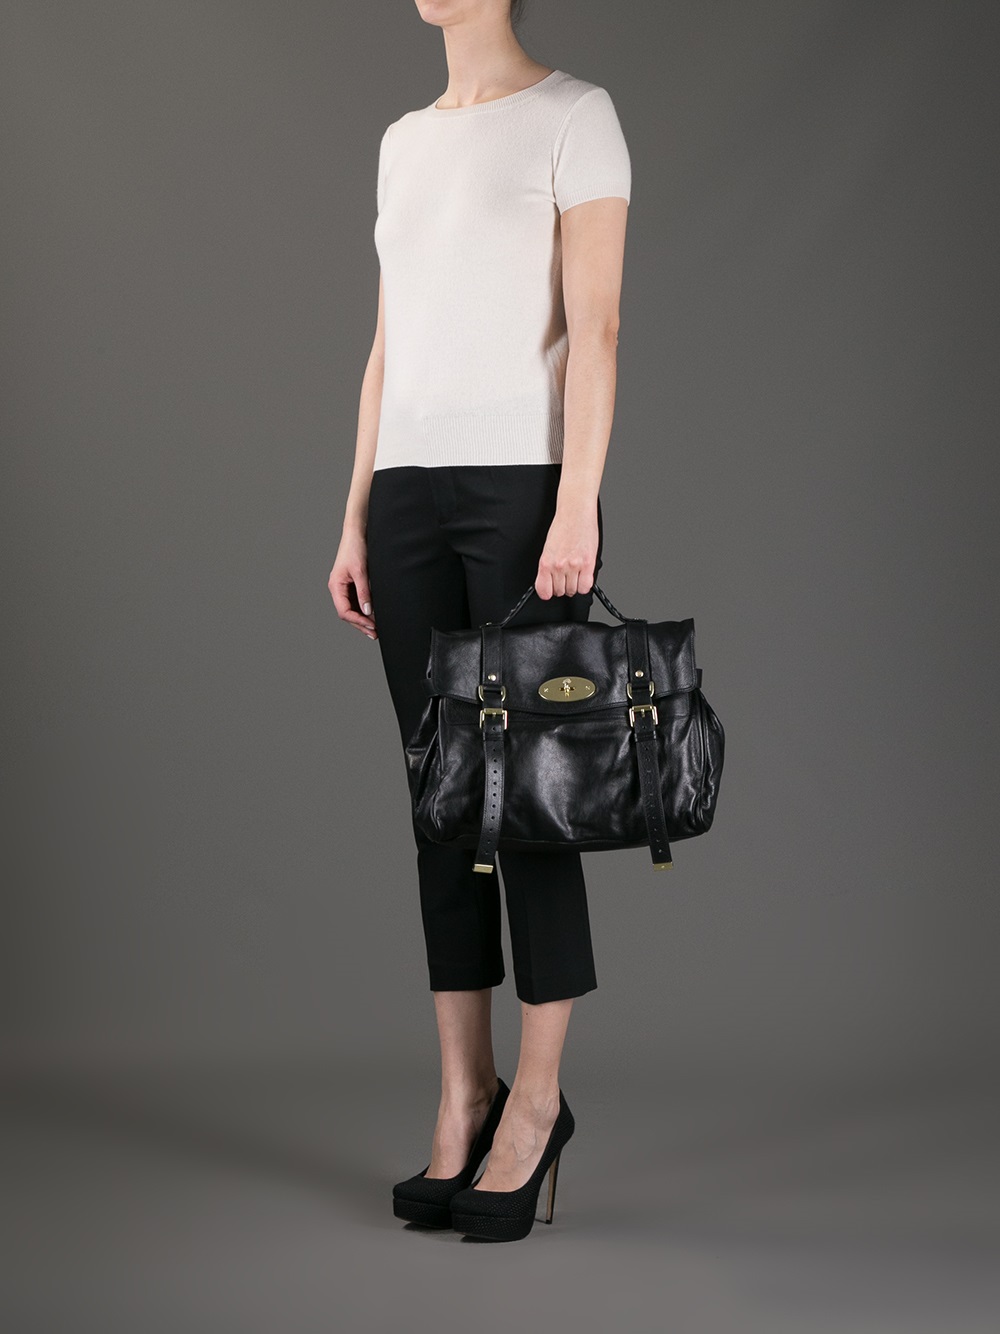 Lyst - Mulberry Oversize Alexa Tote in Black